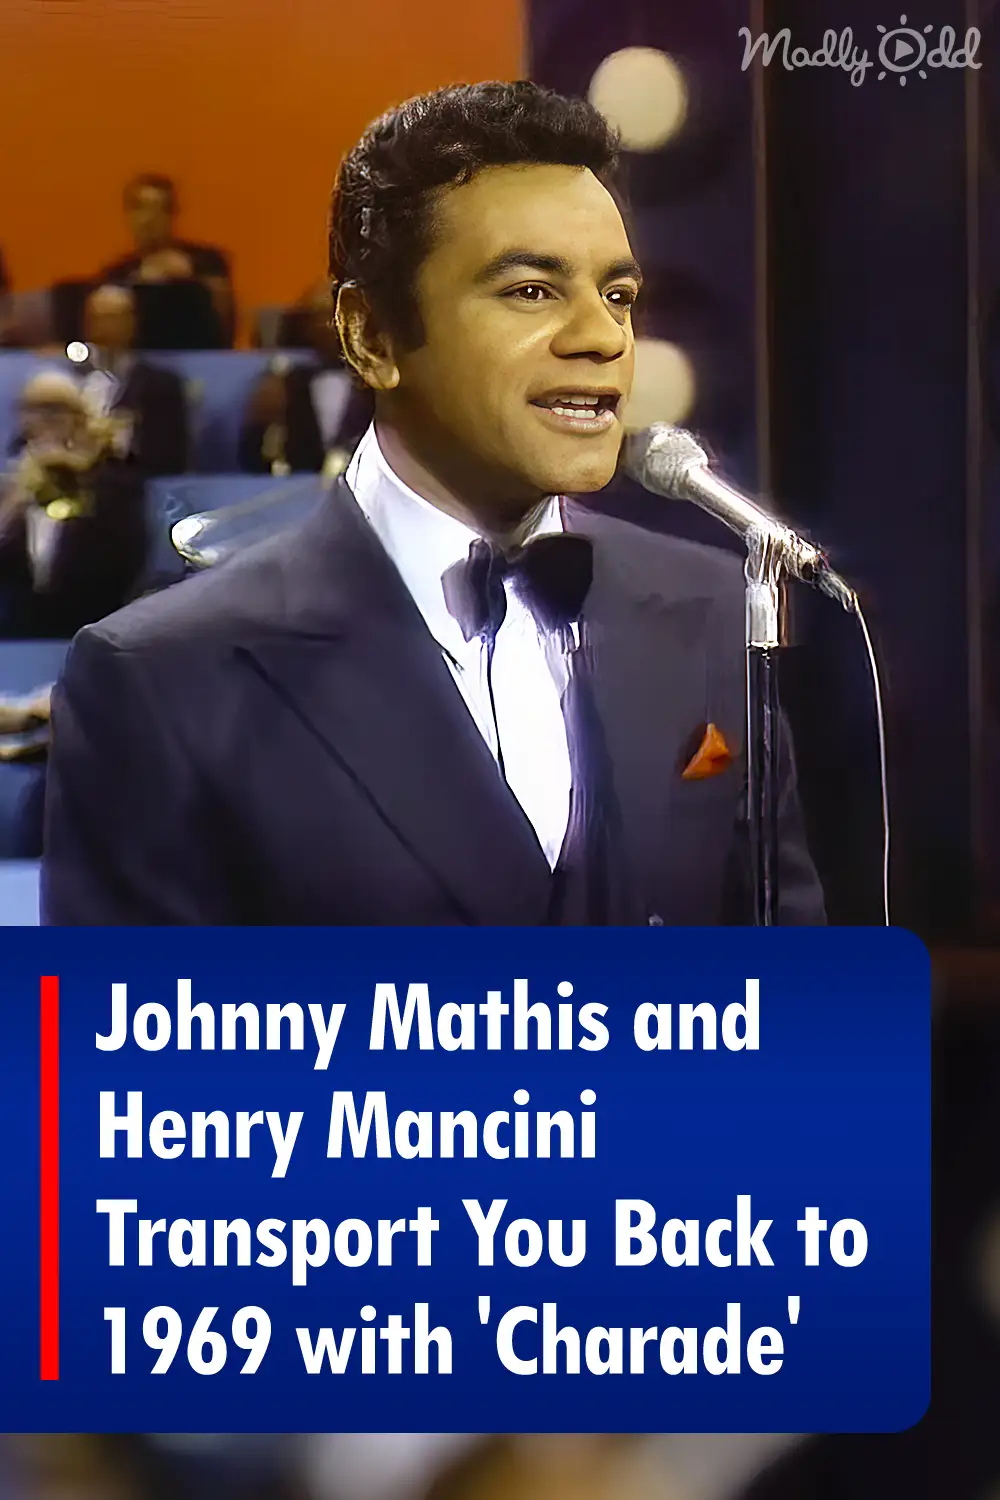 Johnny Mathis and Henry Mancini Transport You Back to 1969 with 'Charade'